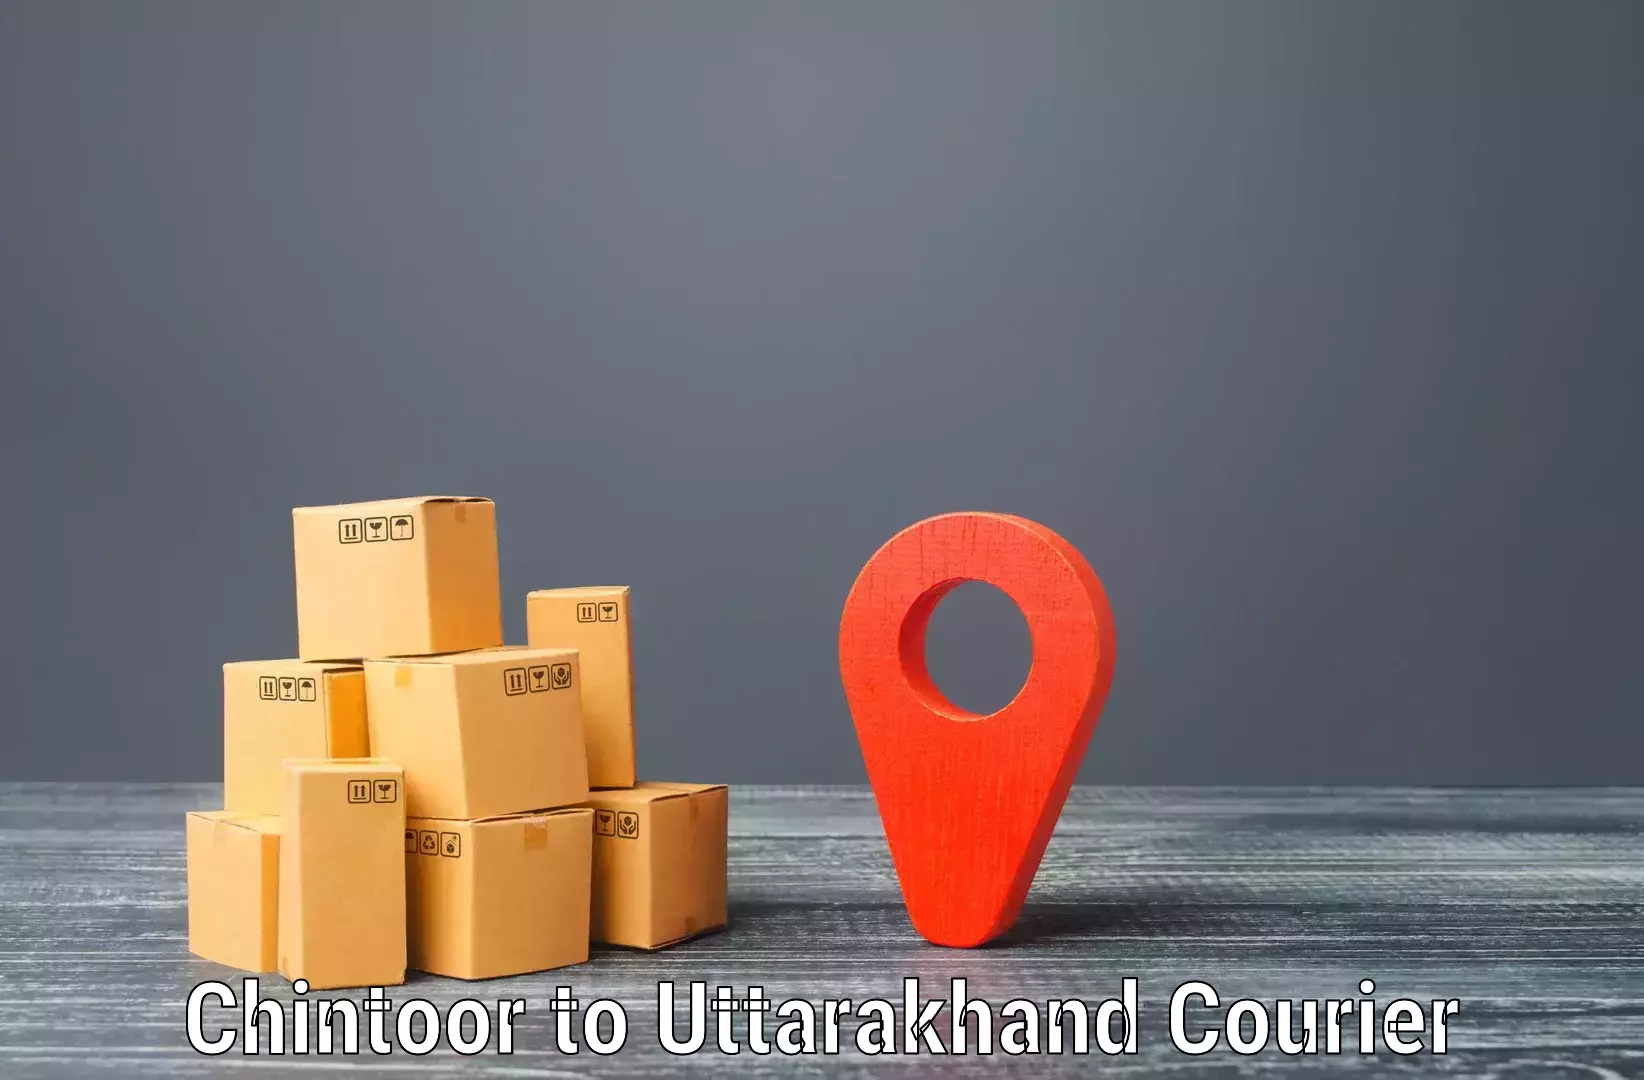 Personalized courier experiences Chintoor to Nainital